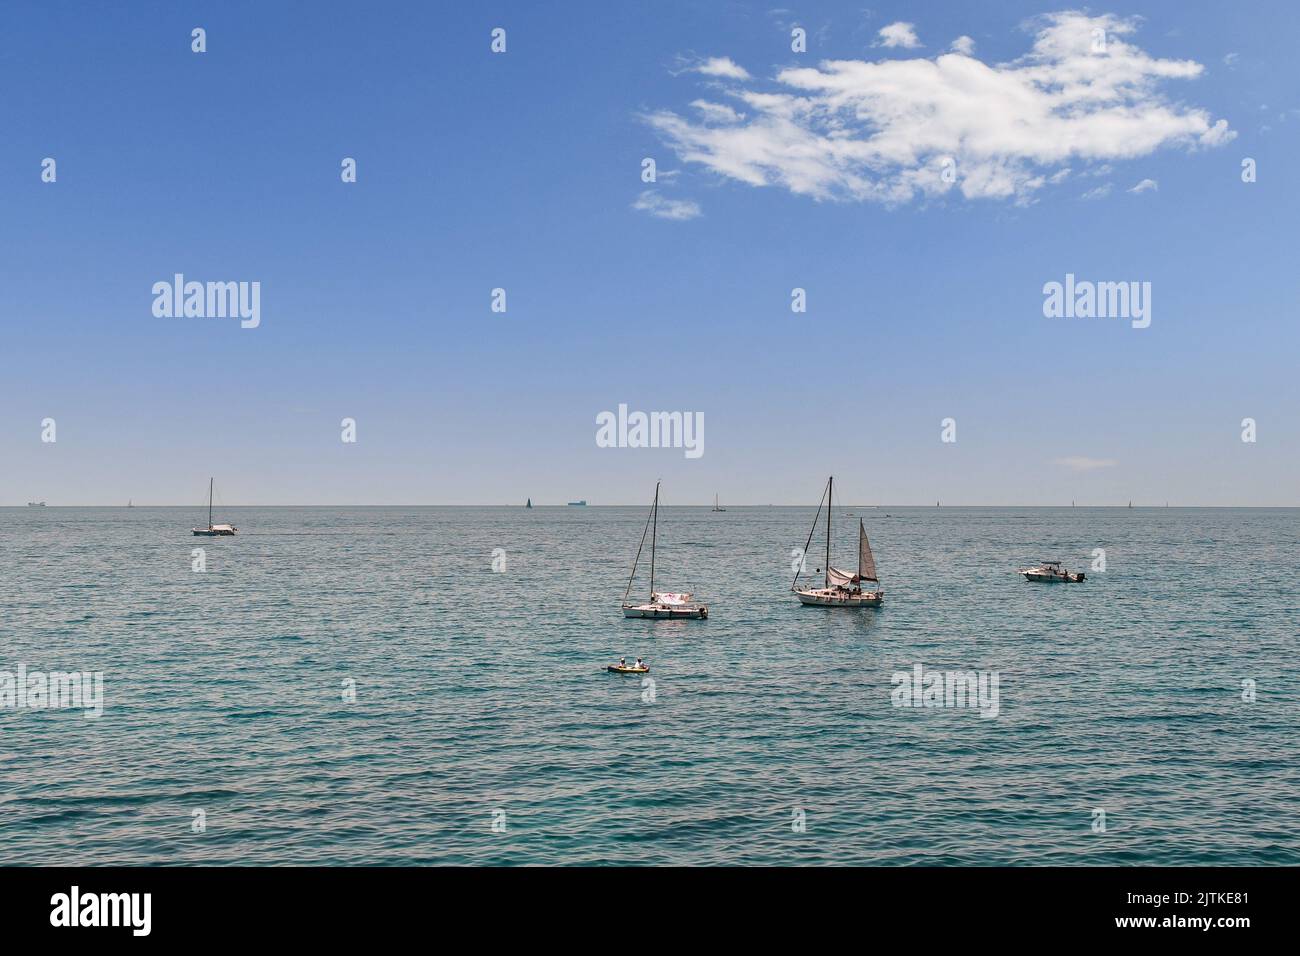 Seascape with sailboats at sea in the Paradise Gulf in a sunny summer day, Nervi, Genoa, Liguria, Italy Stock Photo